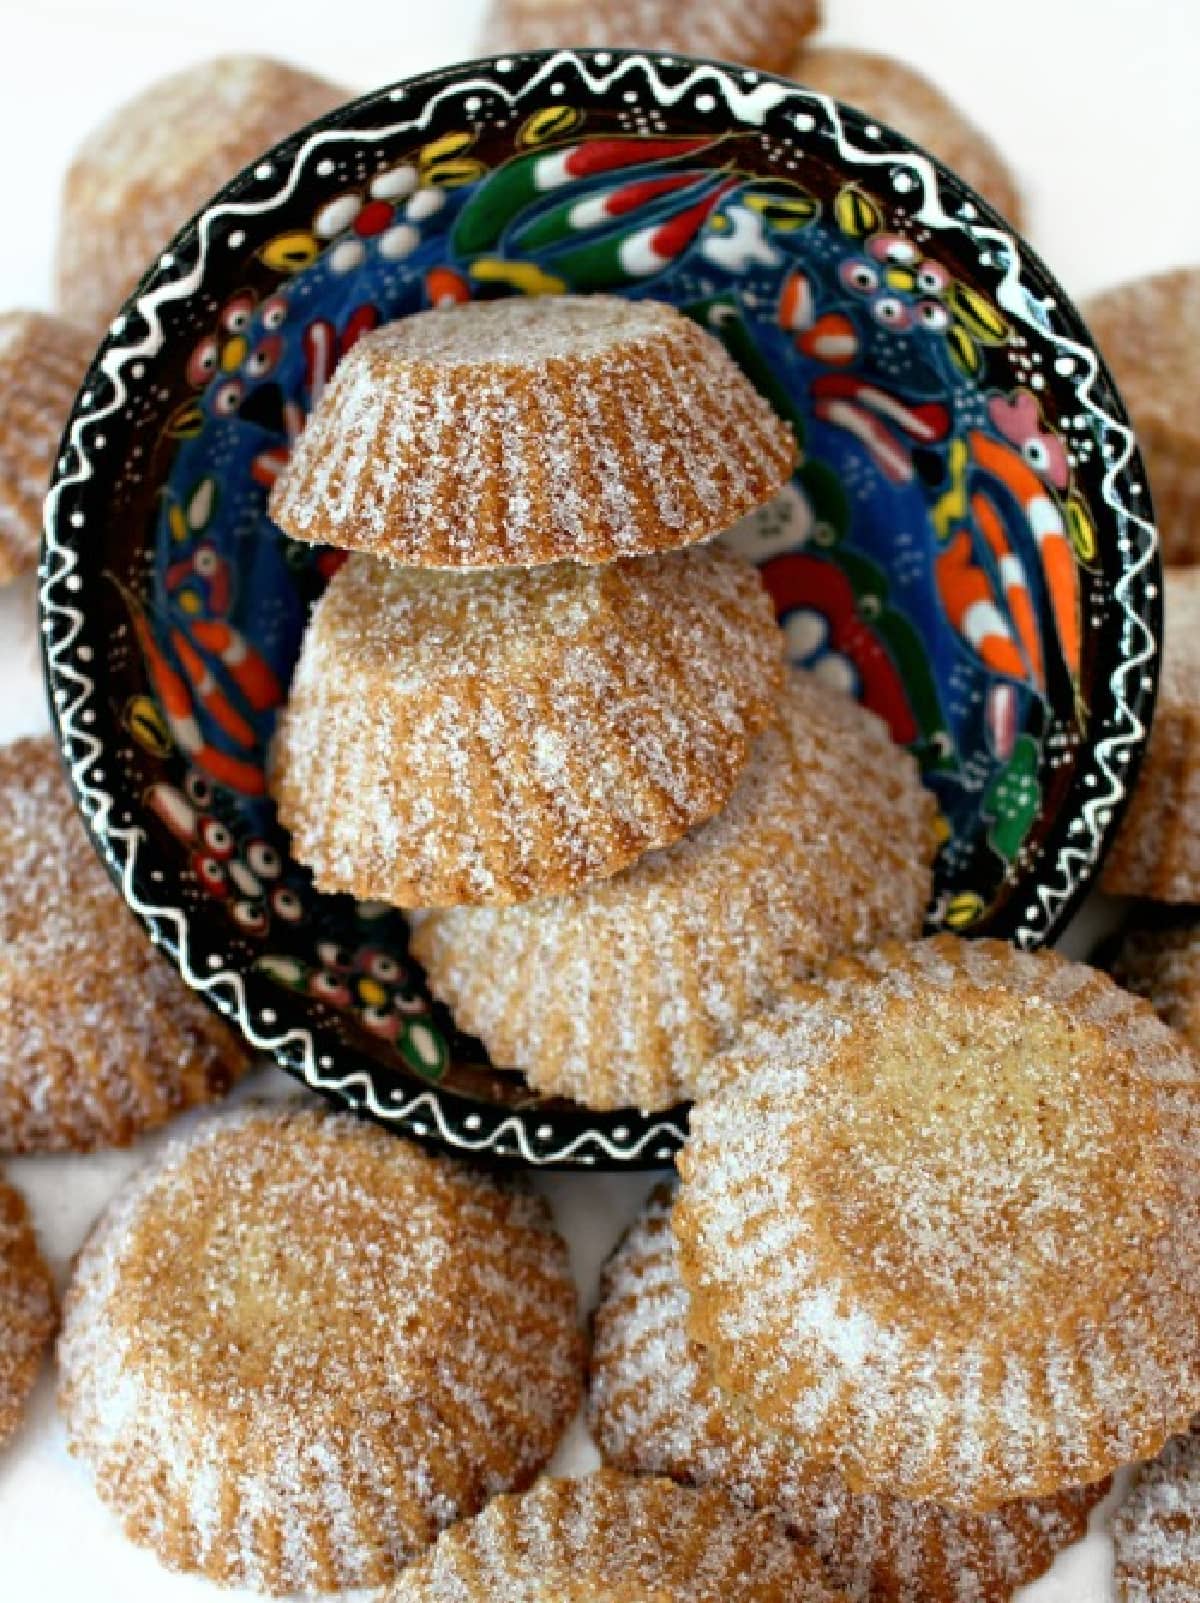 Bosnian Butter Cookies (Šape) in tartlet shapes coated with sugar.